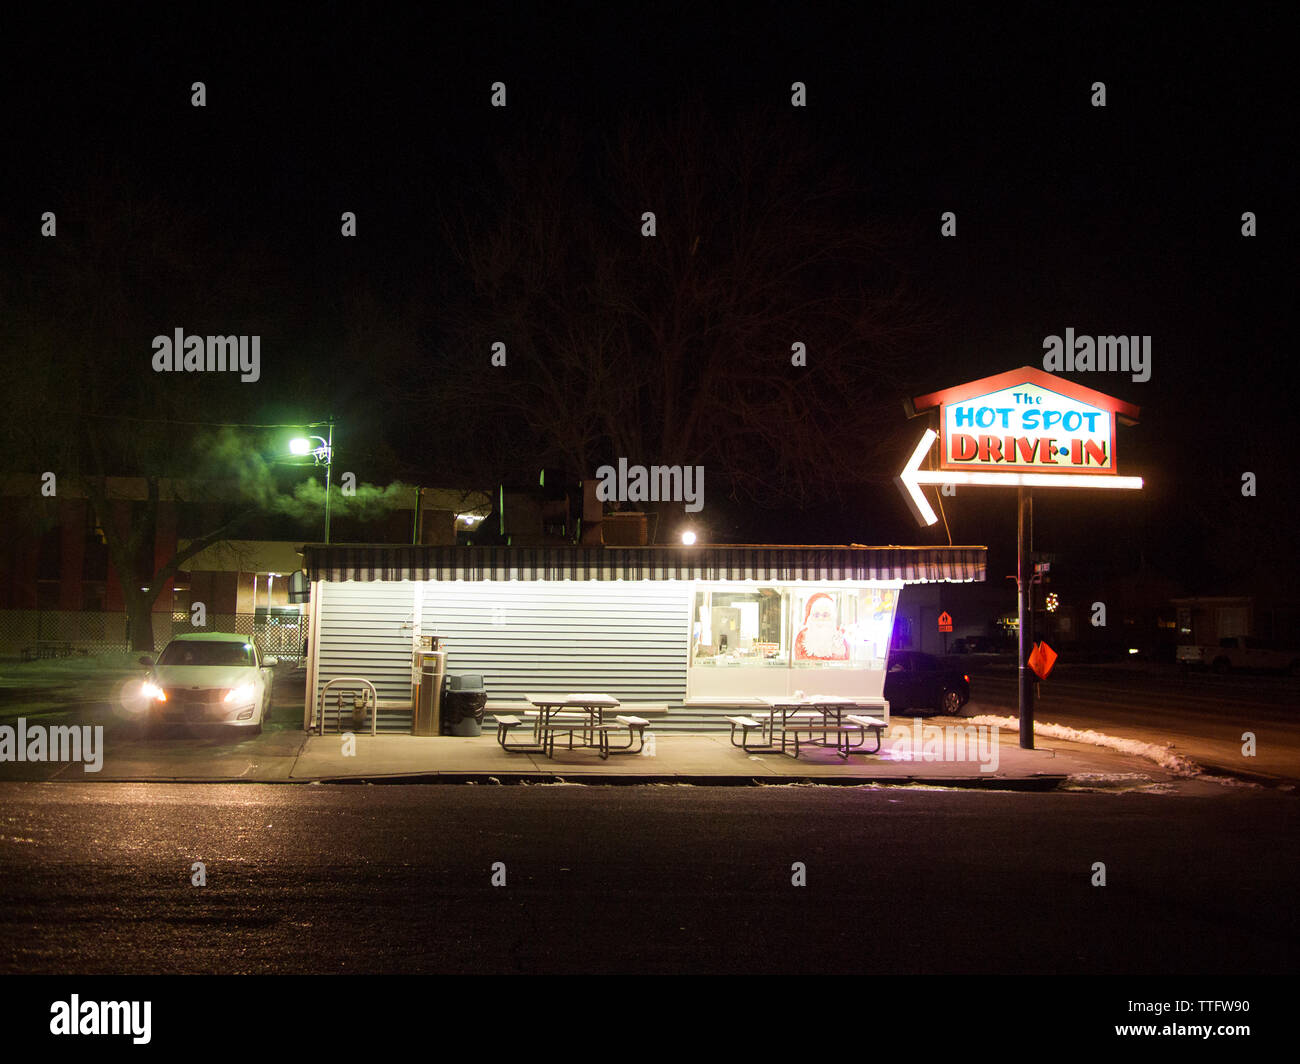 The Hot Spot Drive In at night. Stock Photo